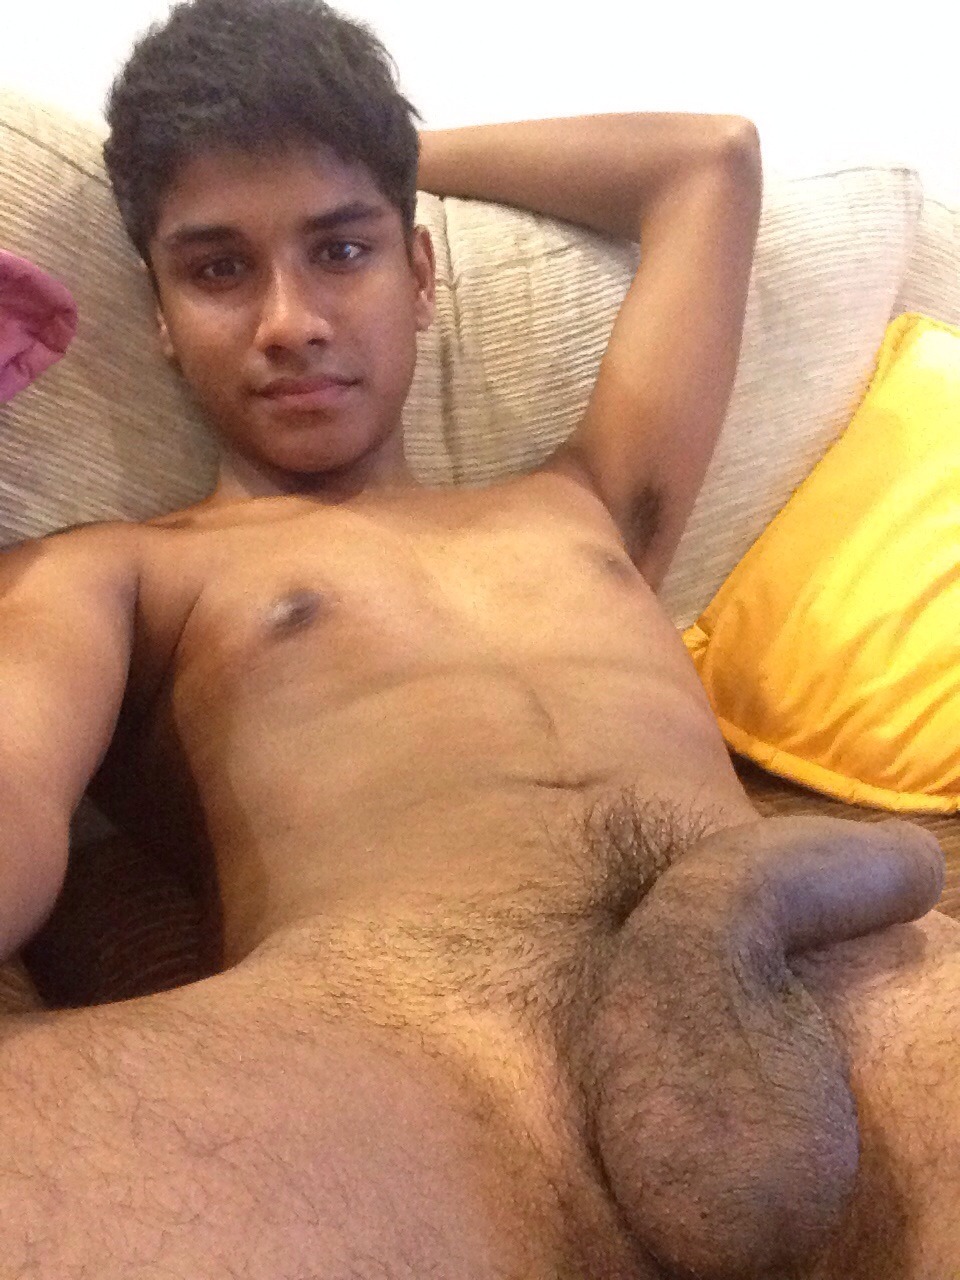 Tamil only boys gay sex alex works his own 5